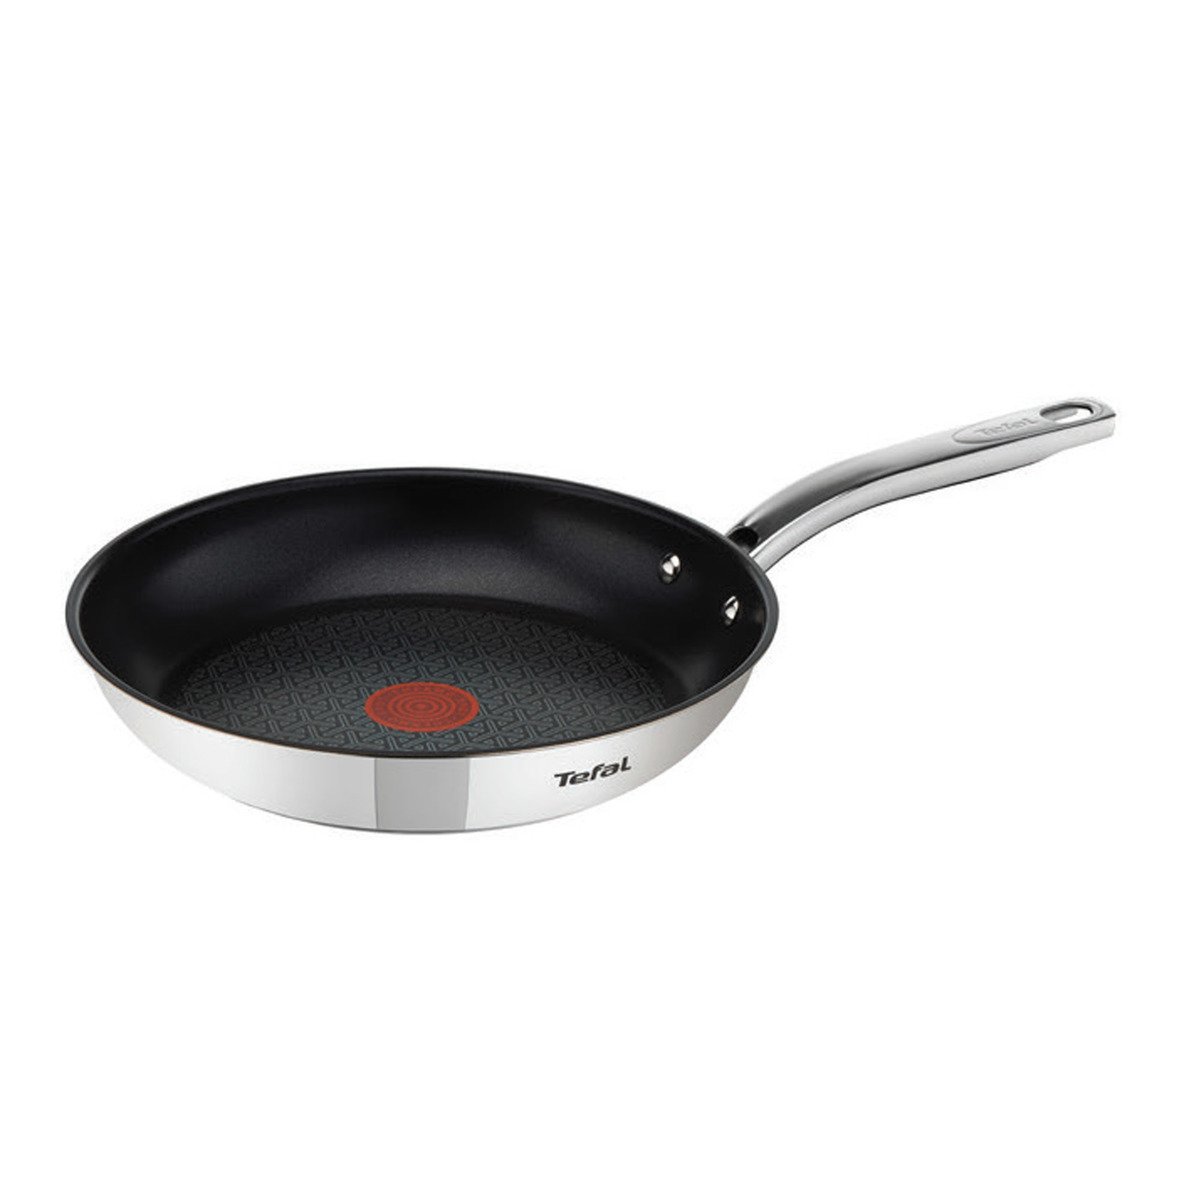 Tefal Intution Stainless Steel Non-Stick Wok Pan, 28 cm